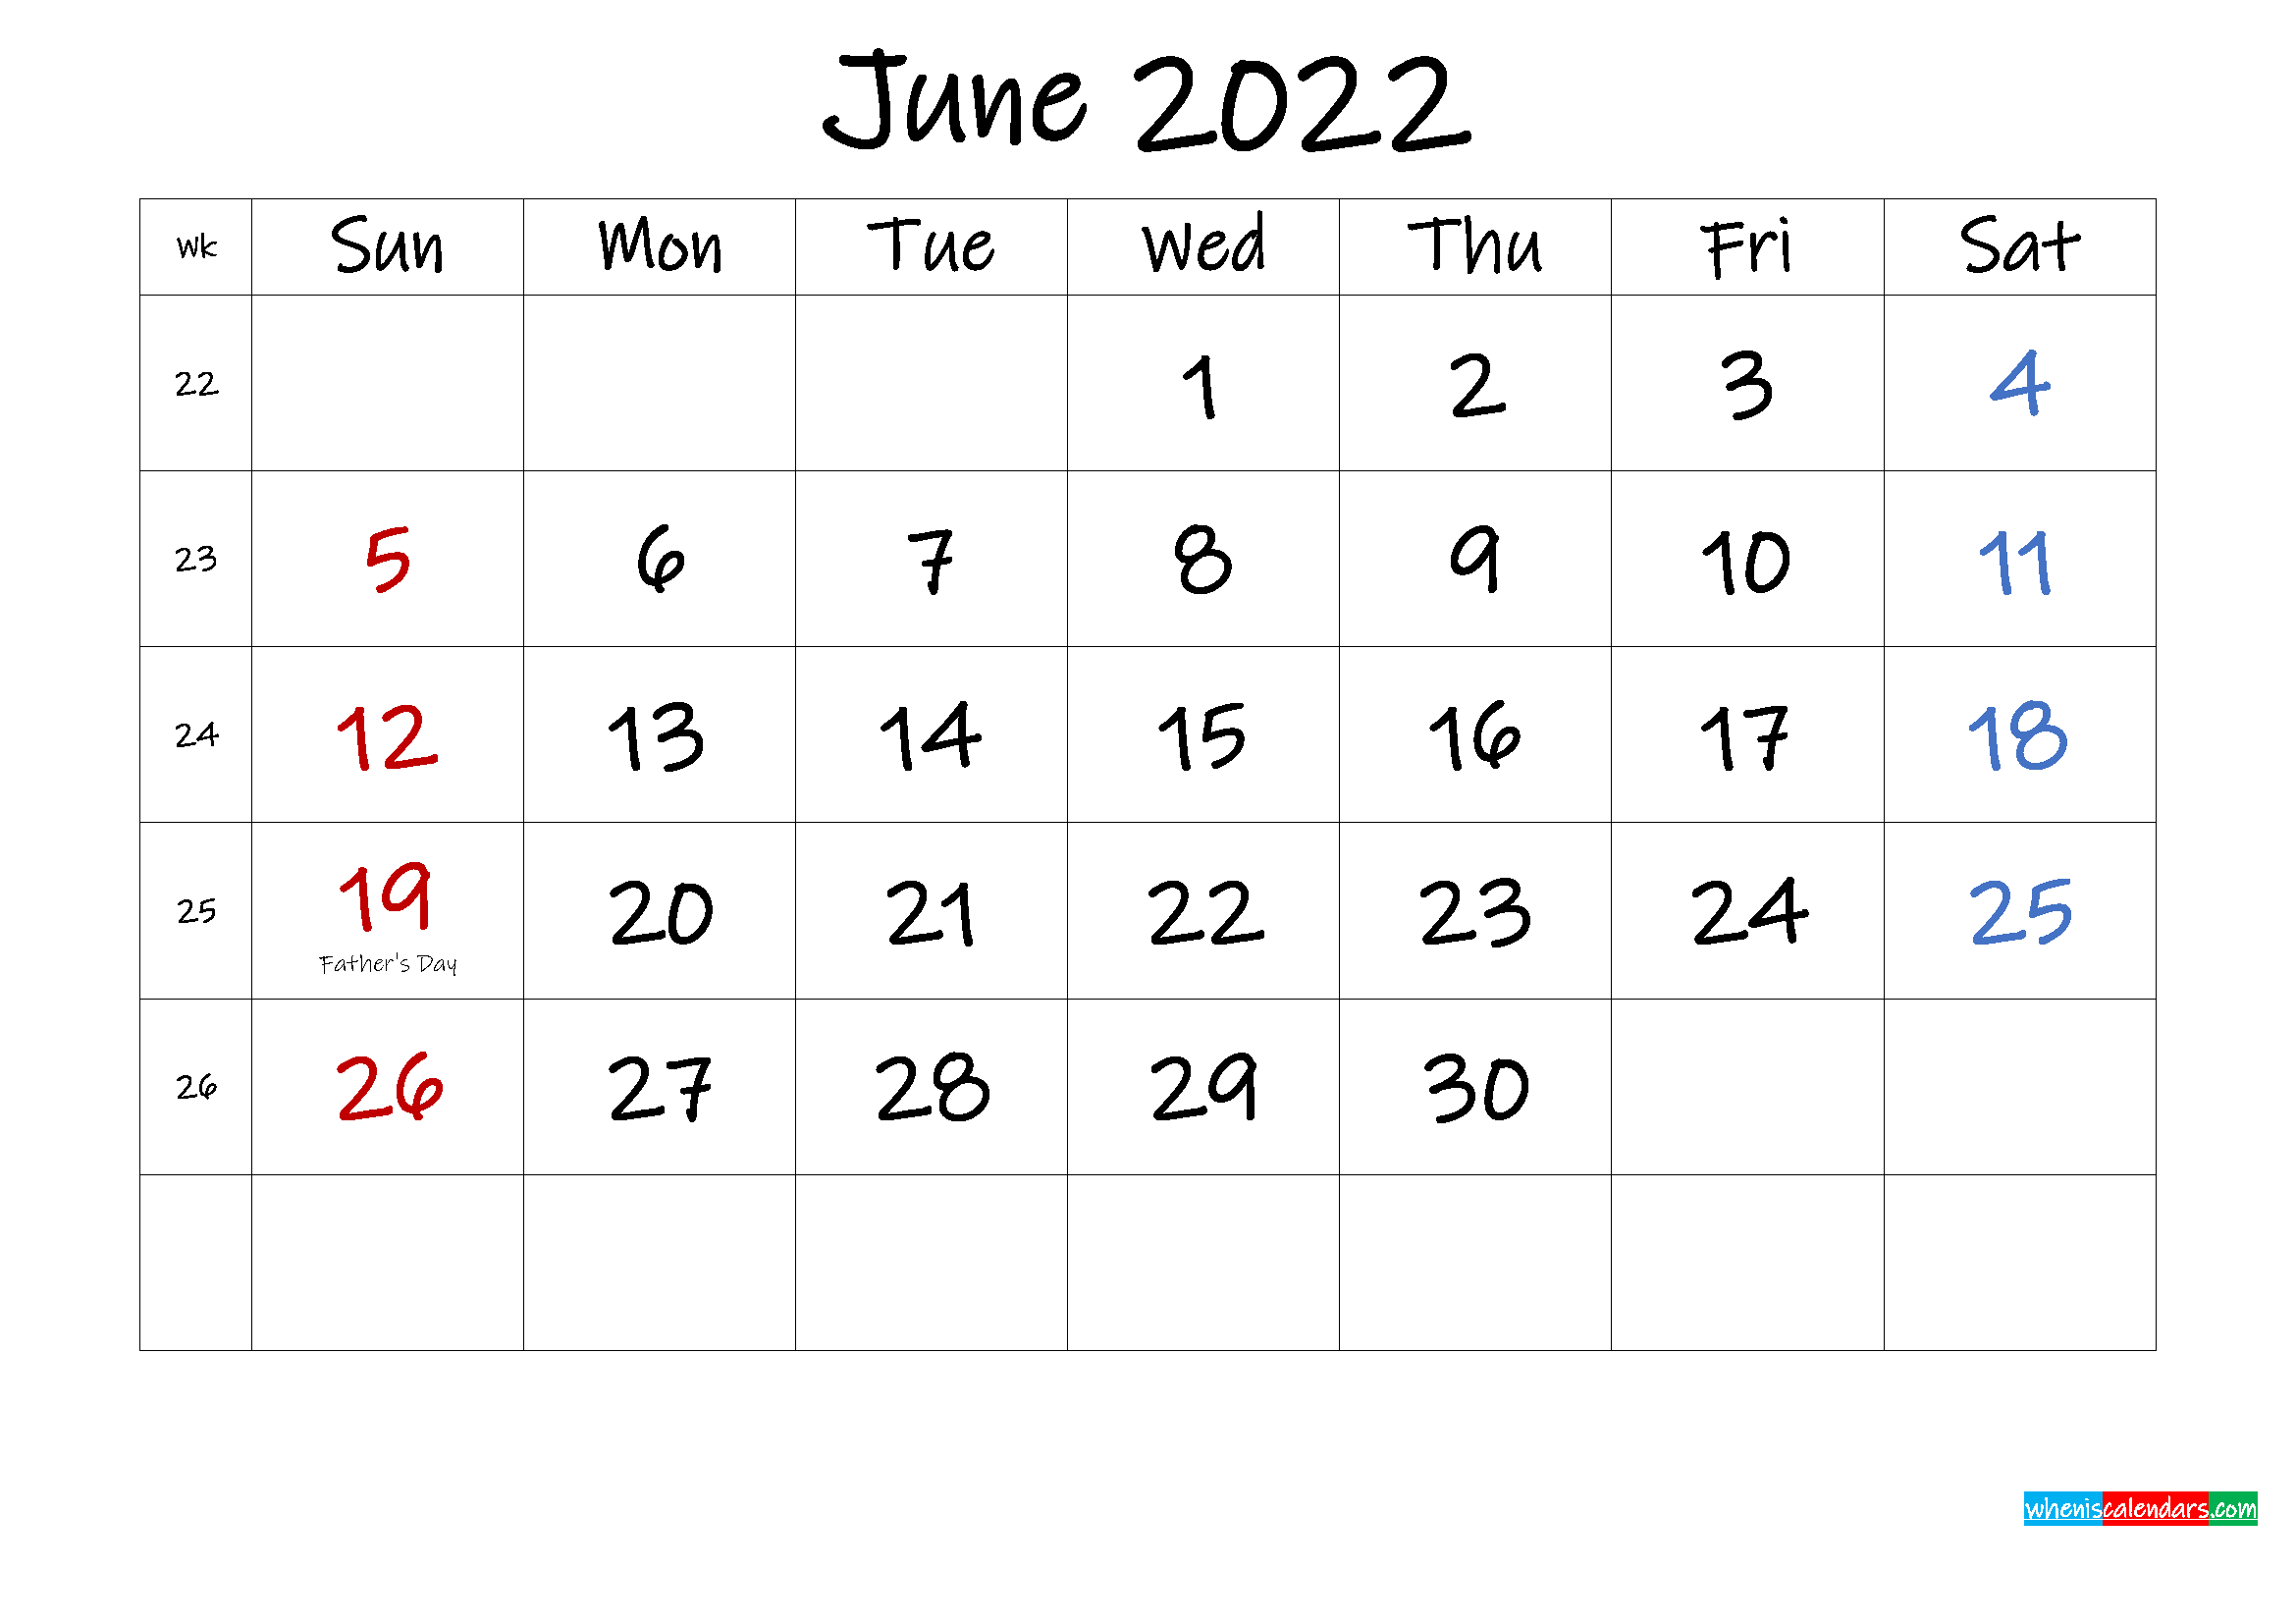 June 2022 Free Printable Calendar with Holidays - Template ...